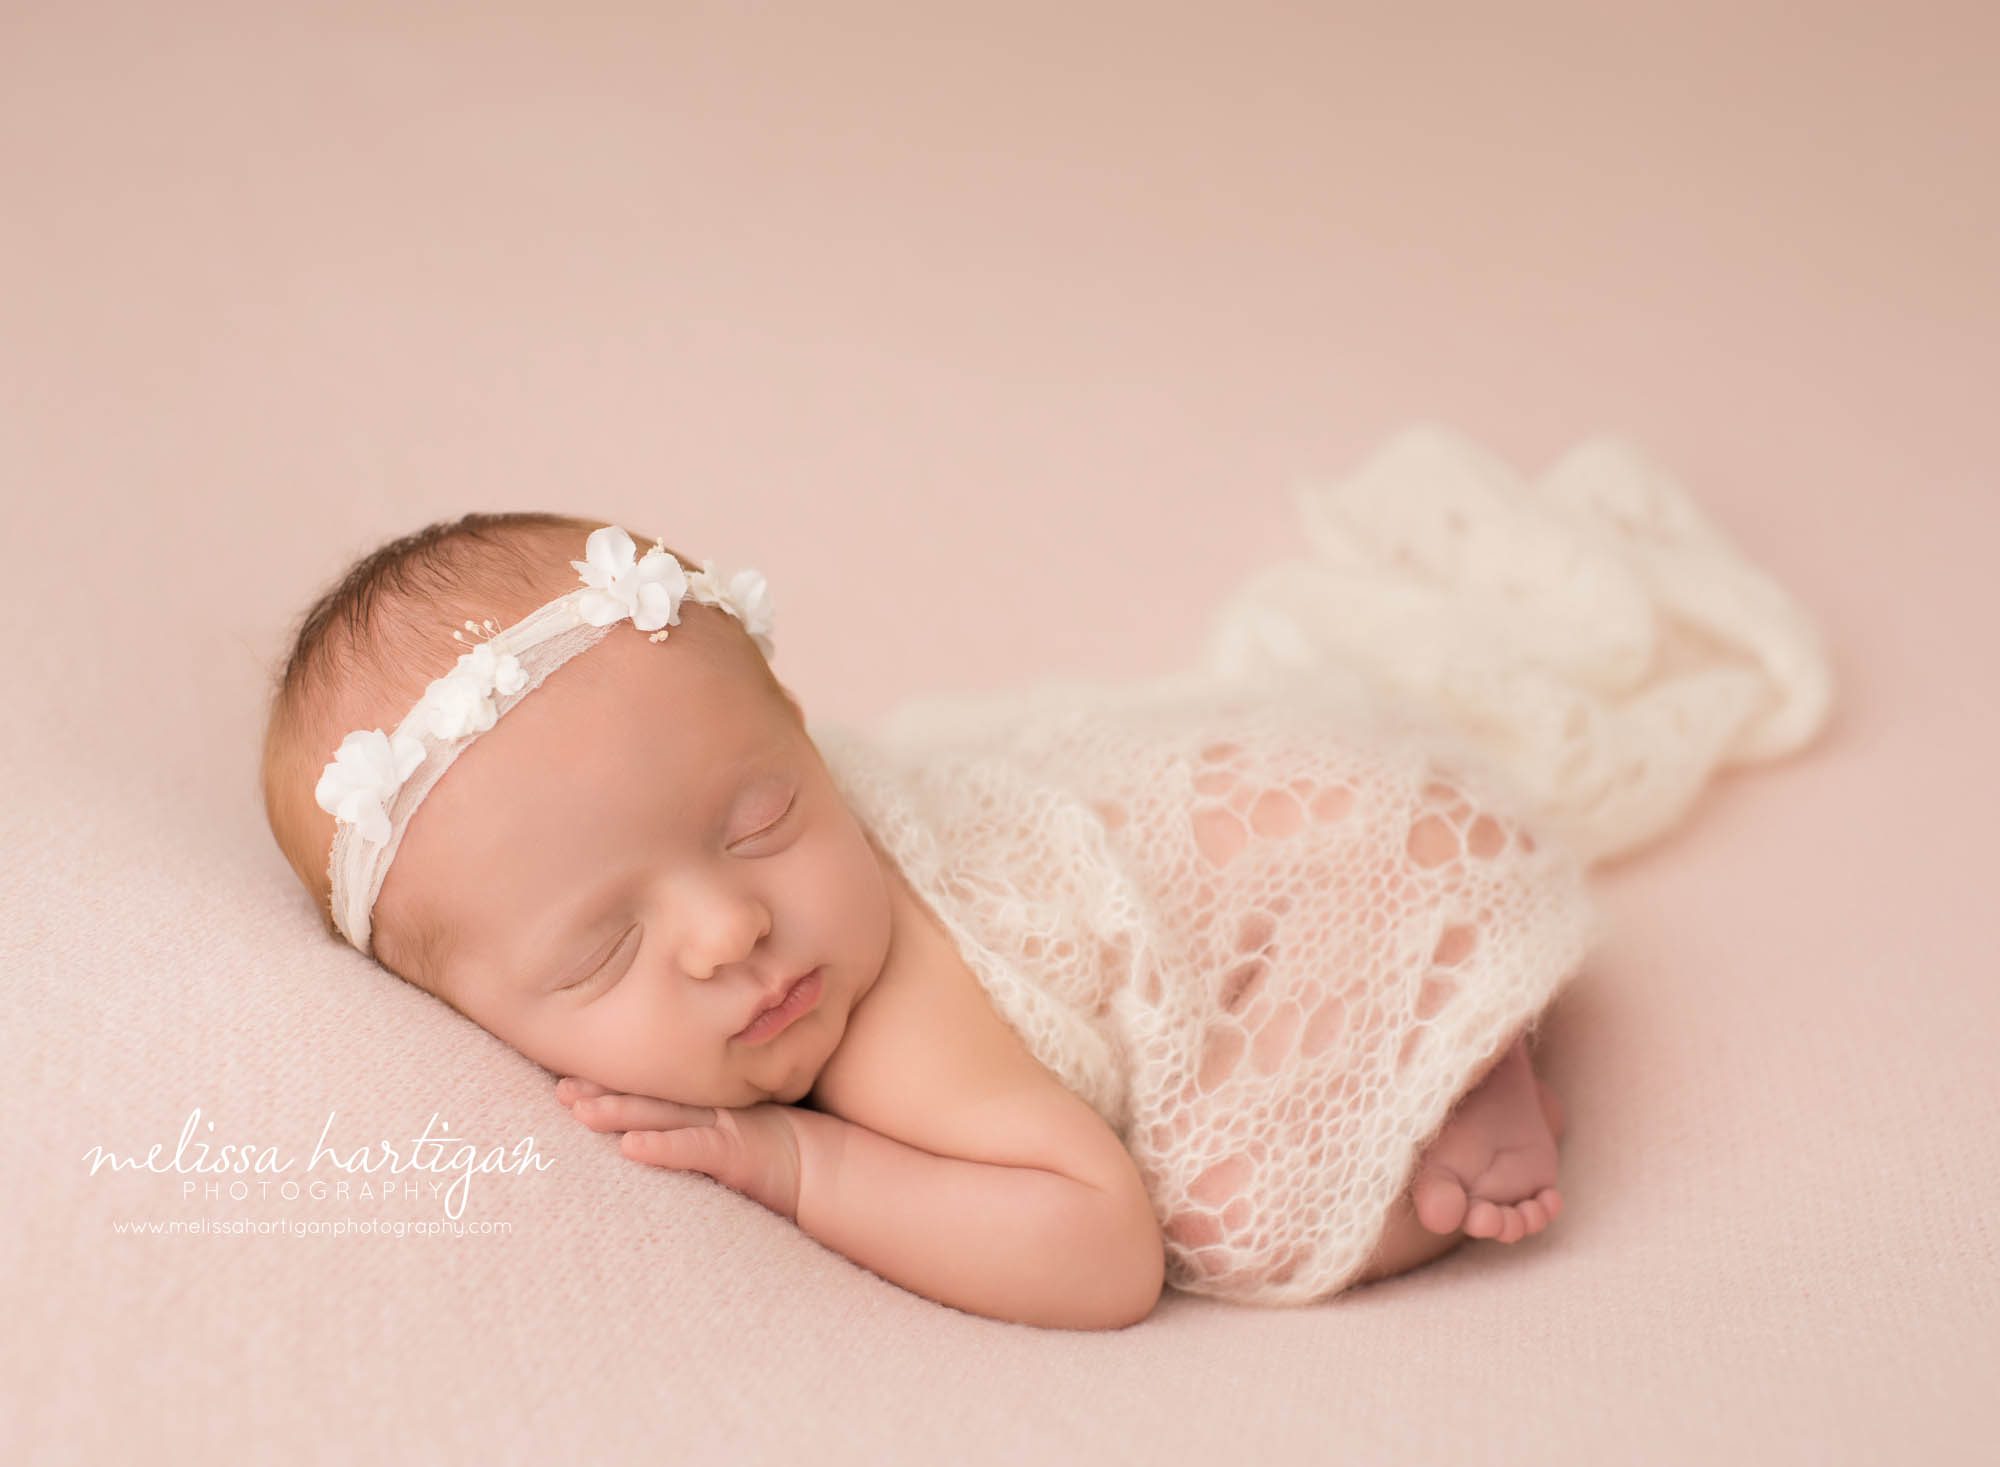 newborn baby girl posed on tummy wearing white flower headband and white knit lace draped over